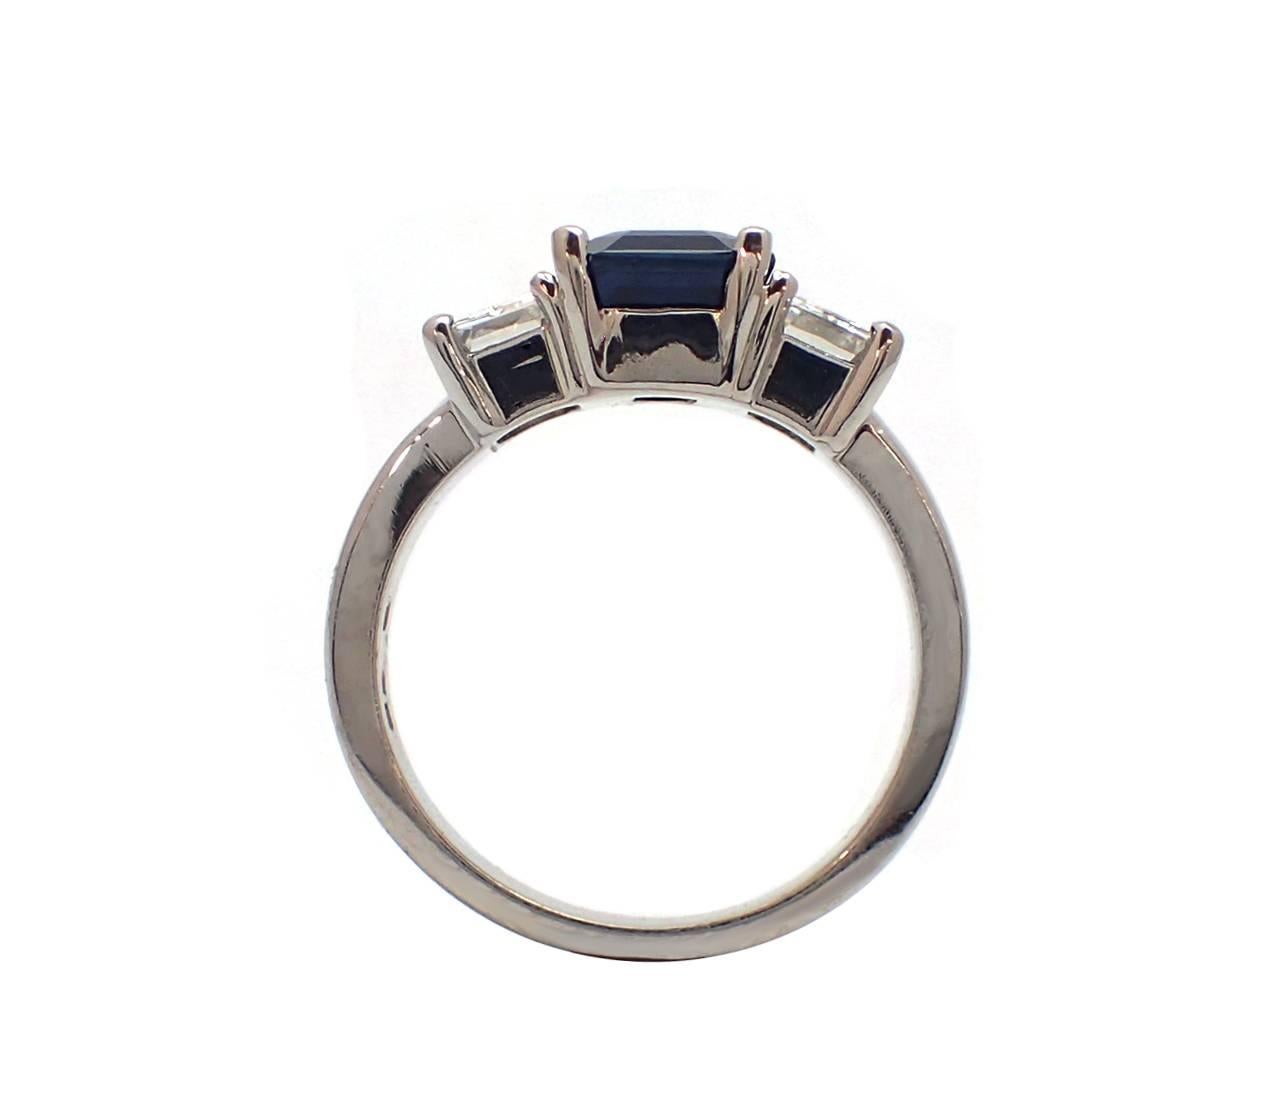 This beautiful platinum ring features a stunning 3.24ct emerald cut sapphire set between two emerald cut diamonds totaling 1.53ct. Wear this ring for a classic, timeless look with a pop of color! Finger size 7 1/4 (Sizable).  Medium-medium dark blue